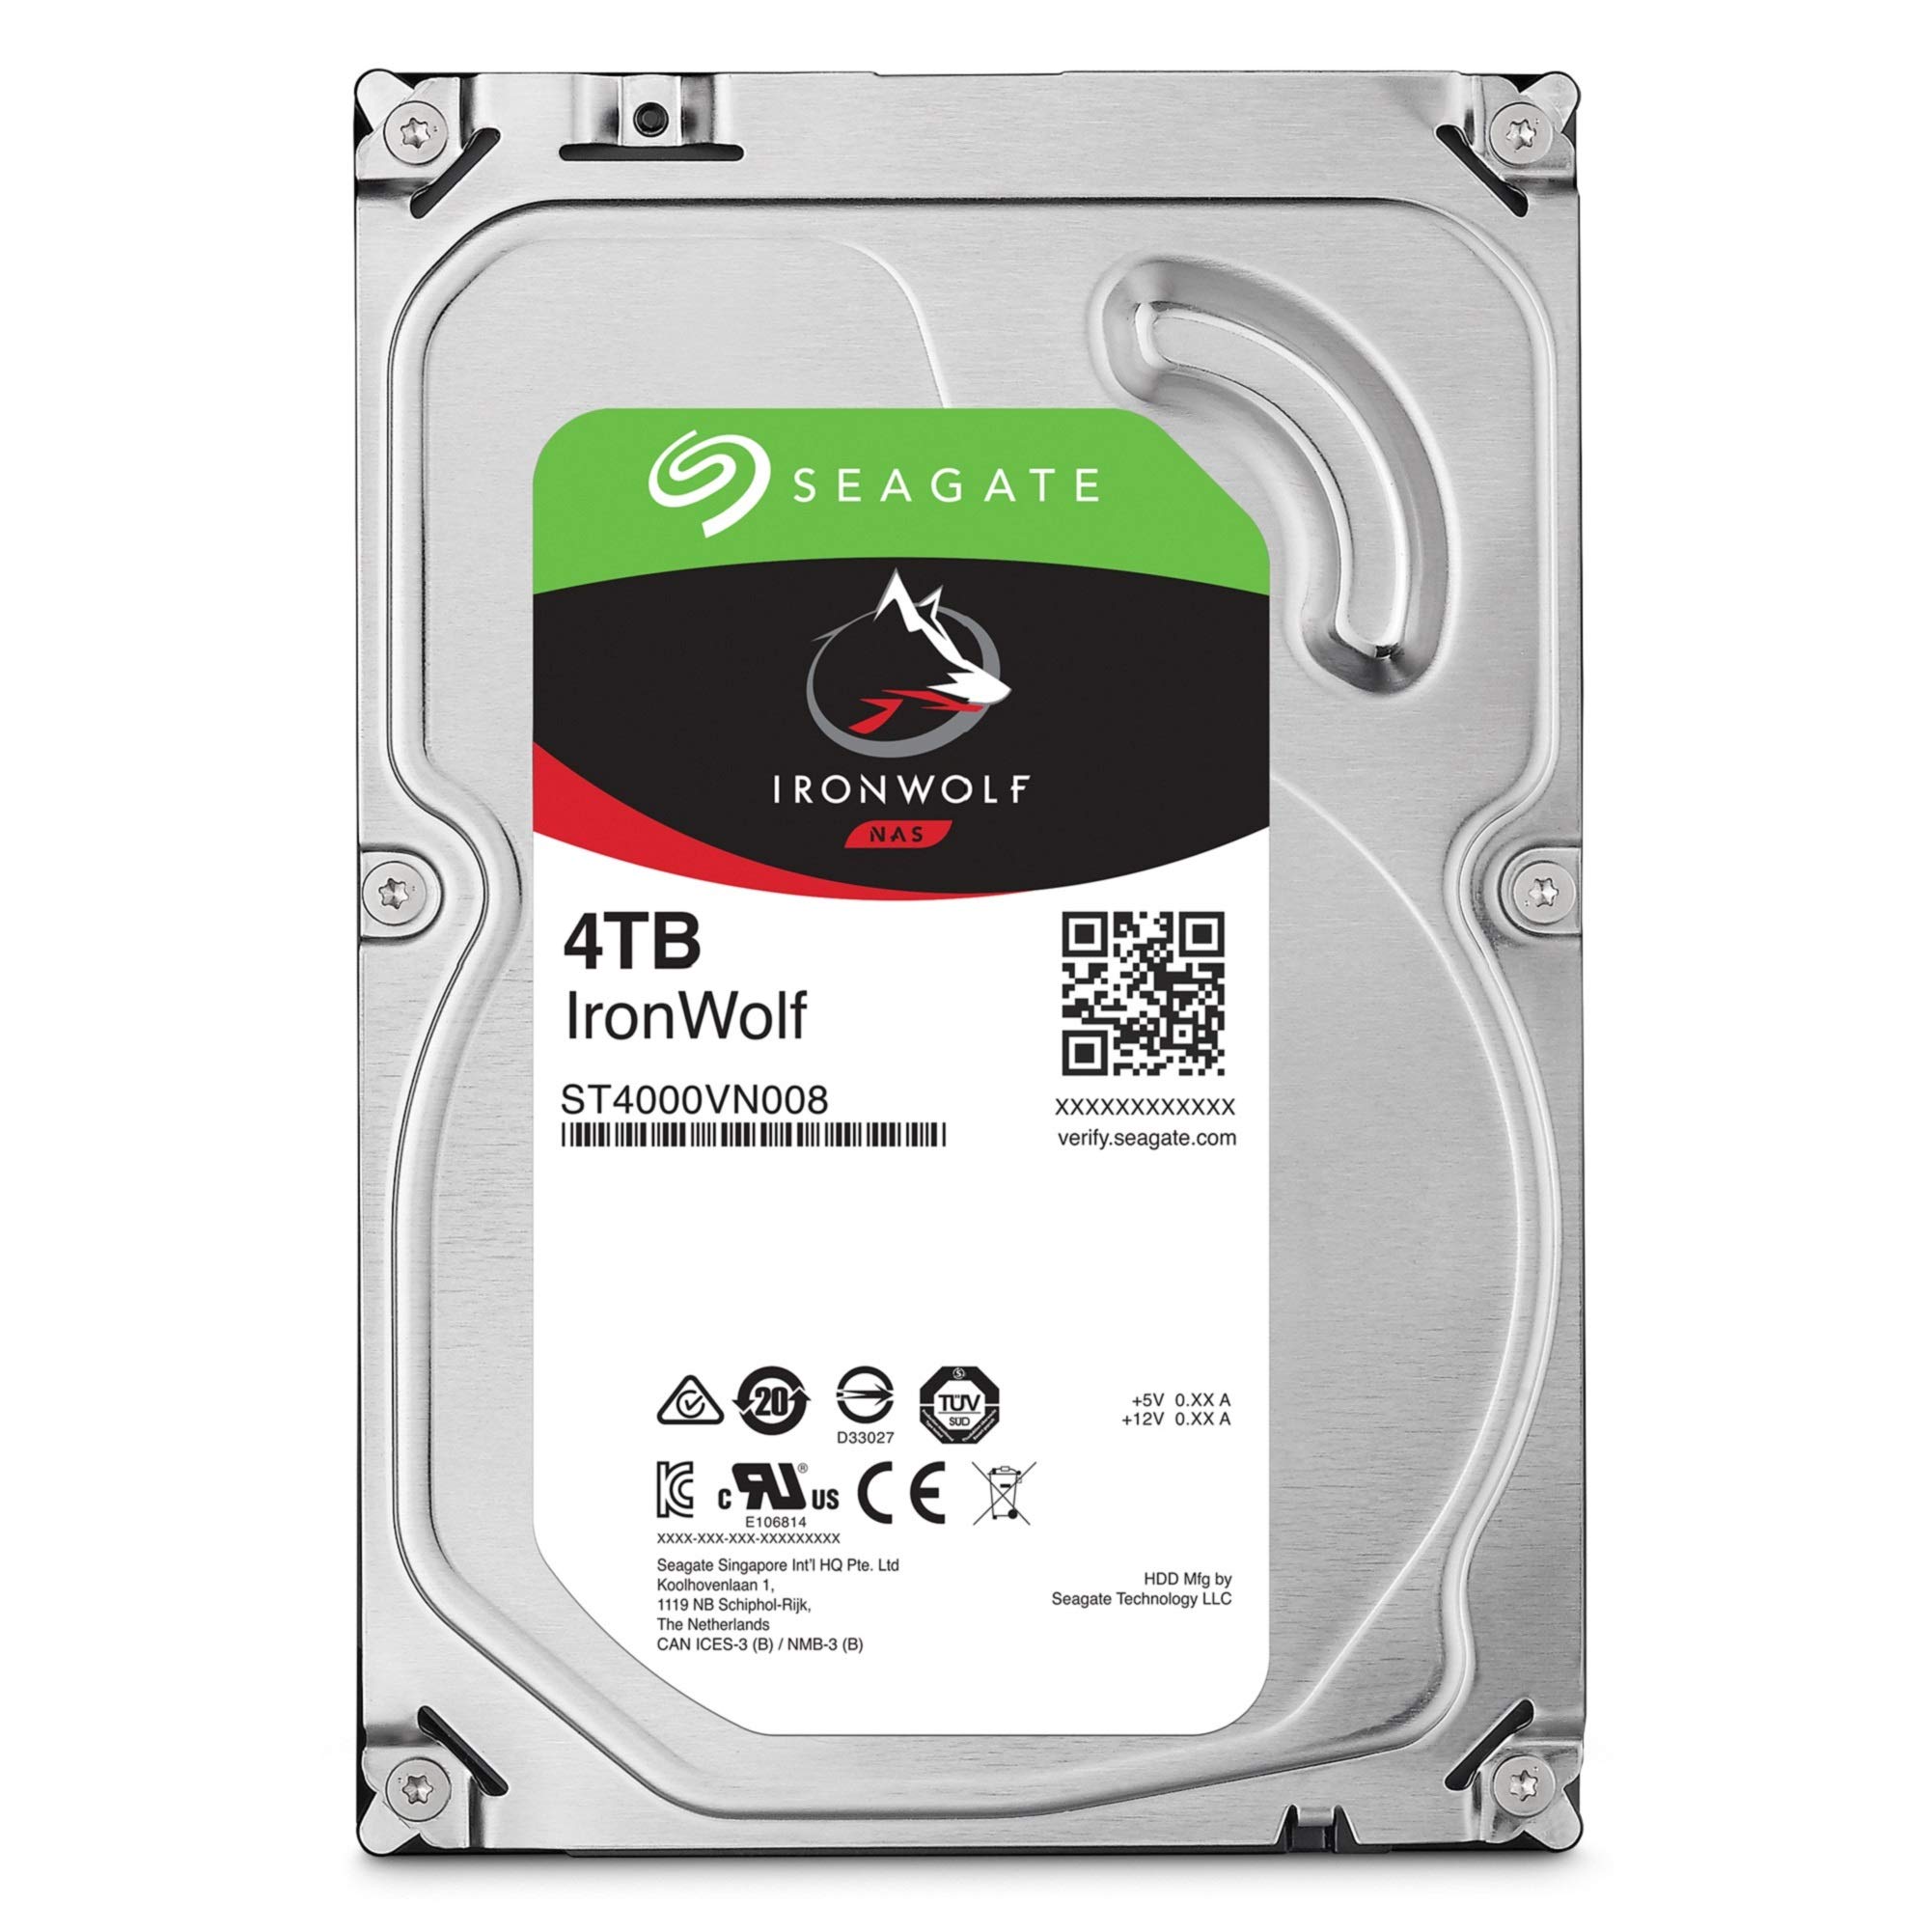 Seagate IronWolf 4TB NAS Internal Hard Drive HDD – CMR 3.5 Inch SATA 6Gb/s 5900 RPM 64MB Cache for RAID Network Attached Storage – Frustration Free Packaging (ST4000VNZ08)